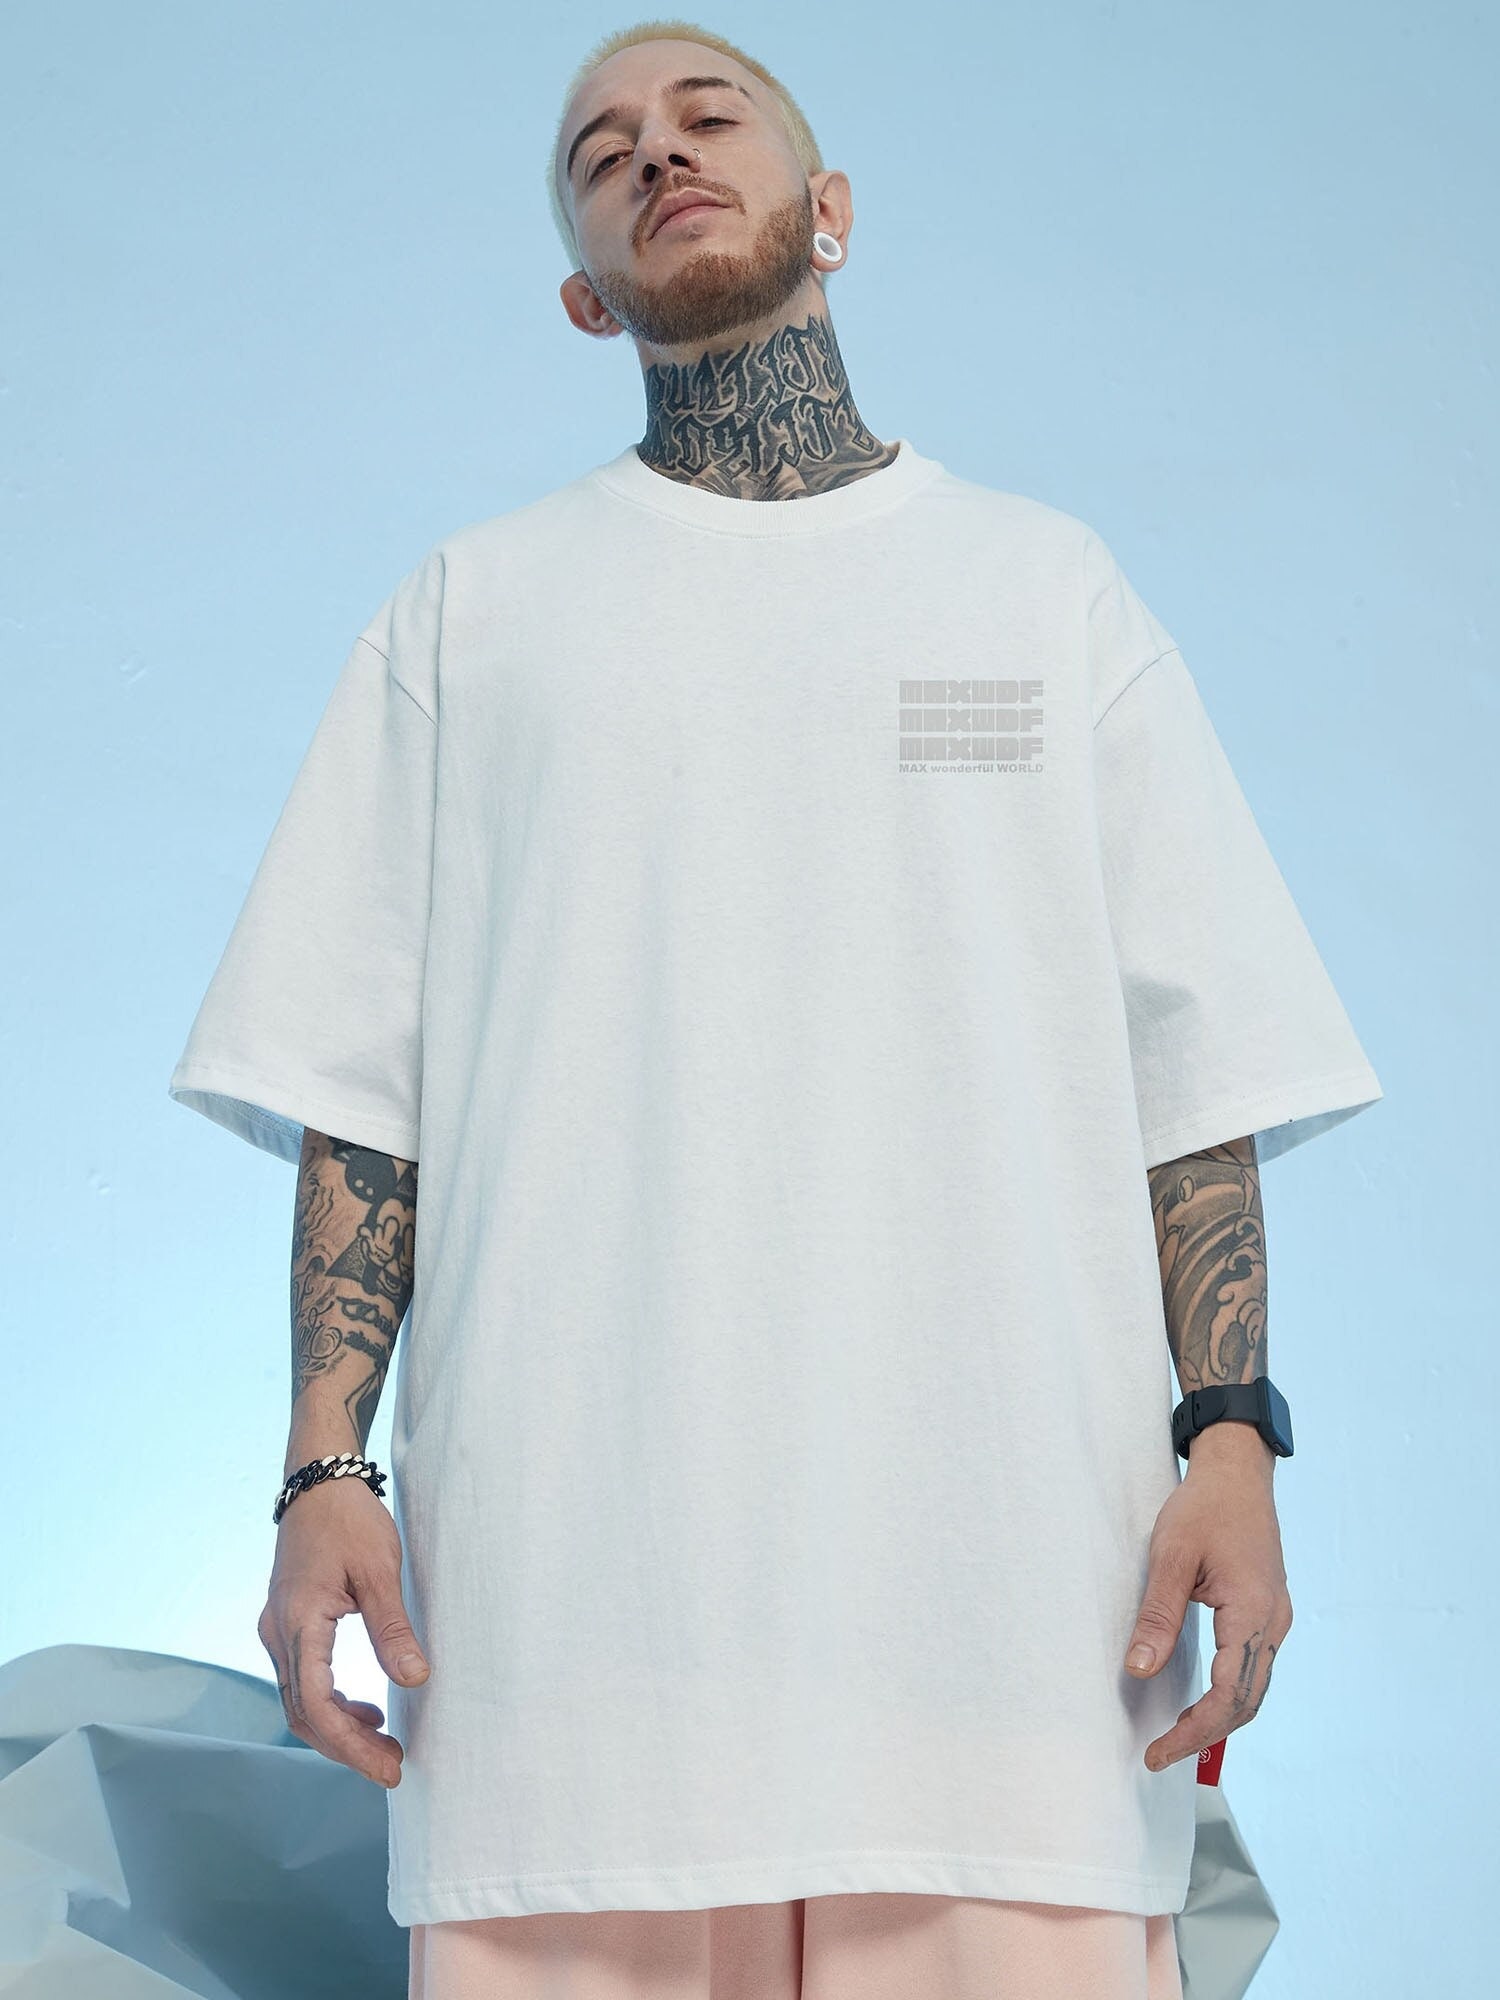 Streetwear Fashion White Graphic T Shirt For Men Summer Oversized Fit Short Sleeve Tees